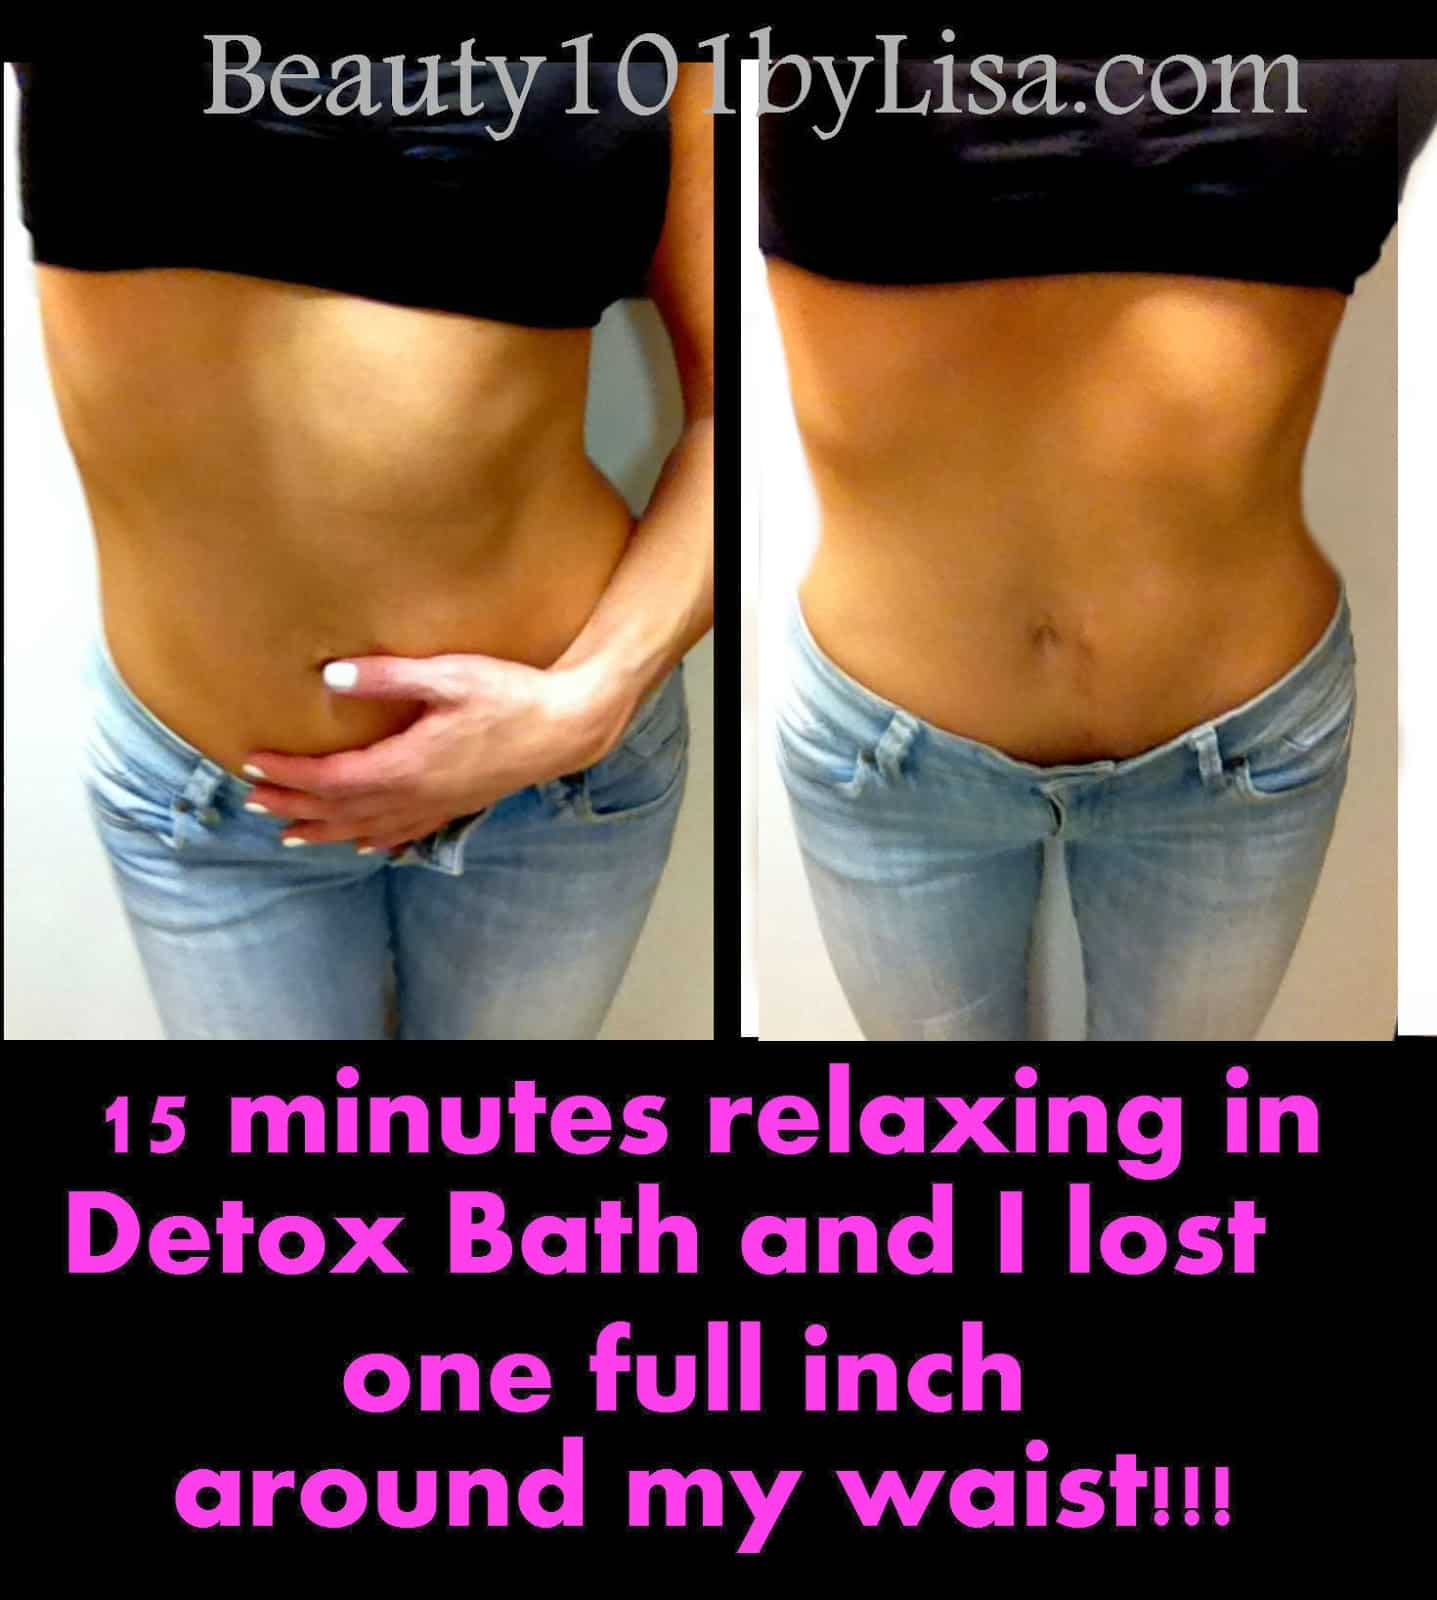 BEAUTY101BYLISA: Reduce BLOATING &  Lose INCHES Fast!!!